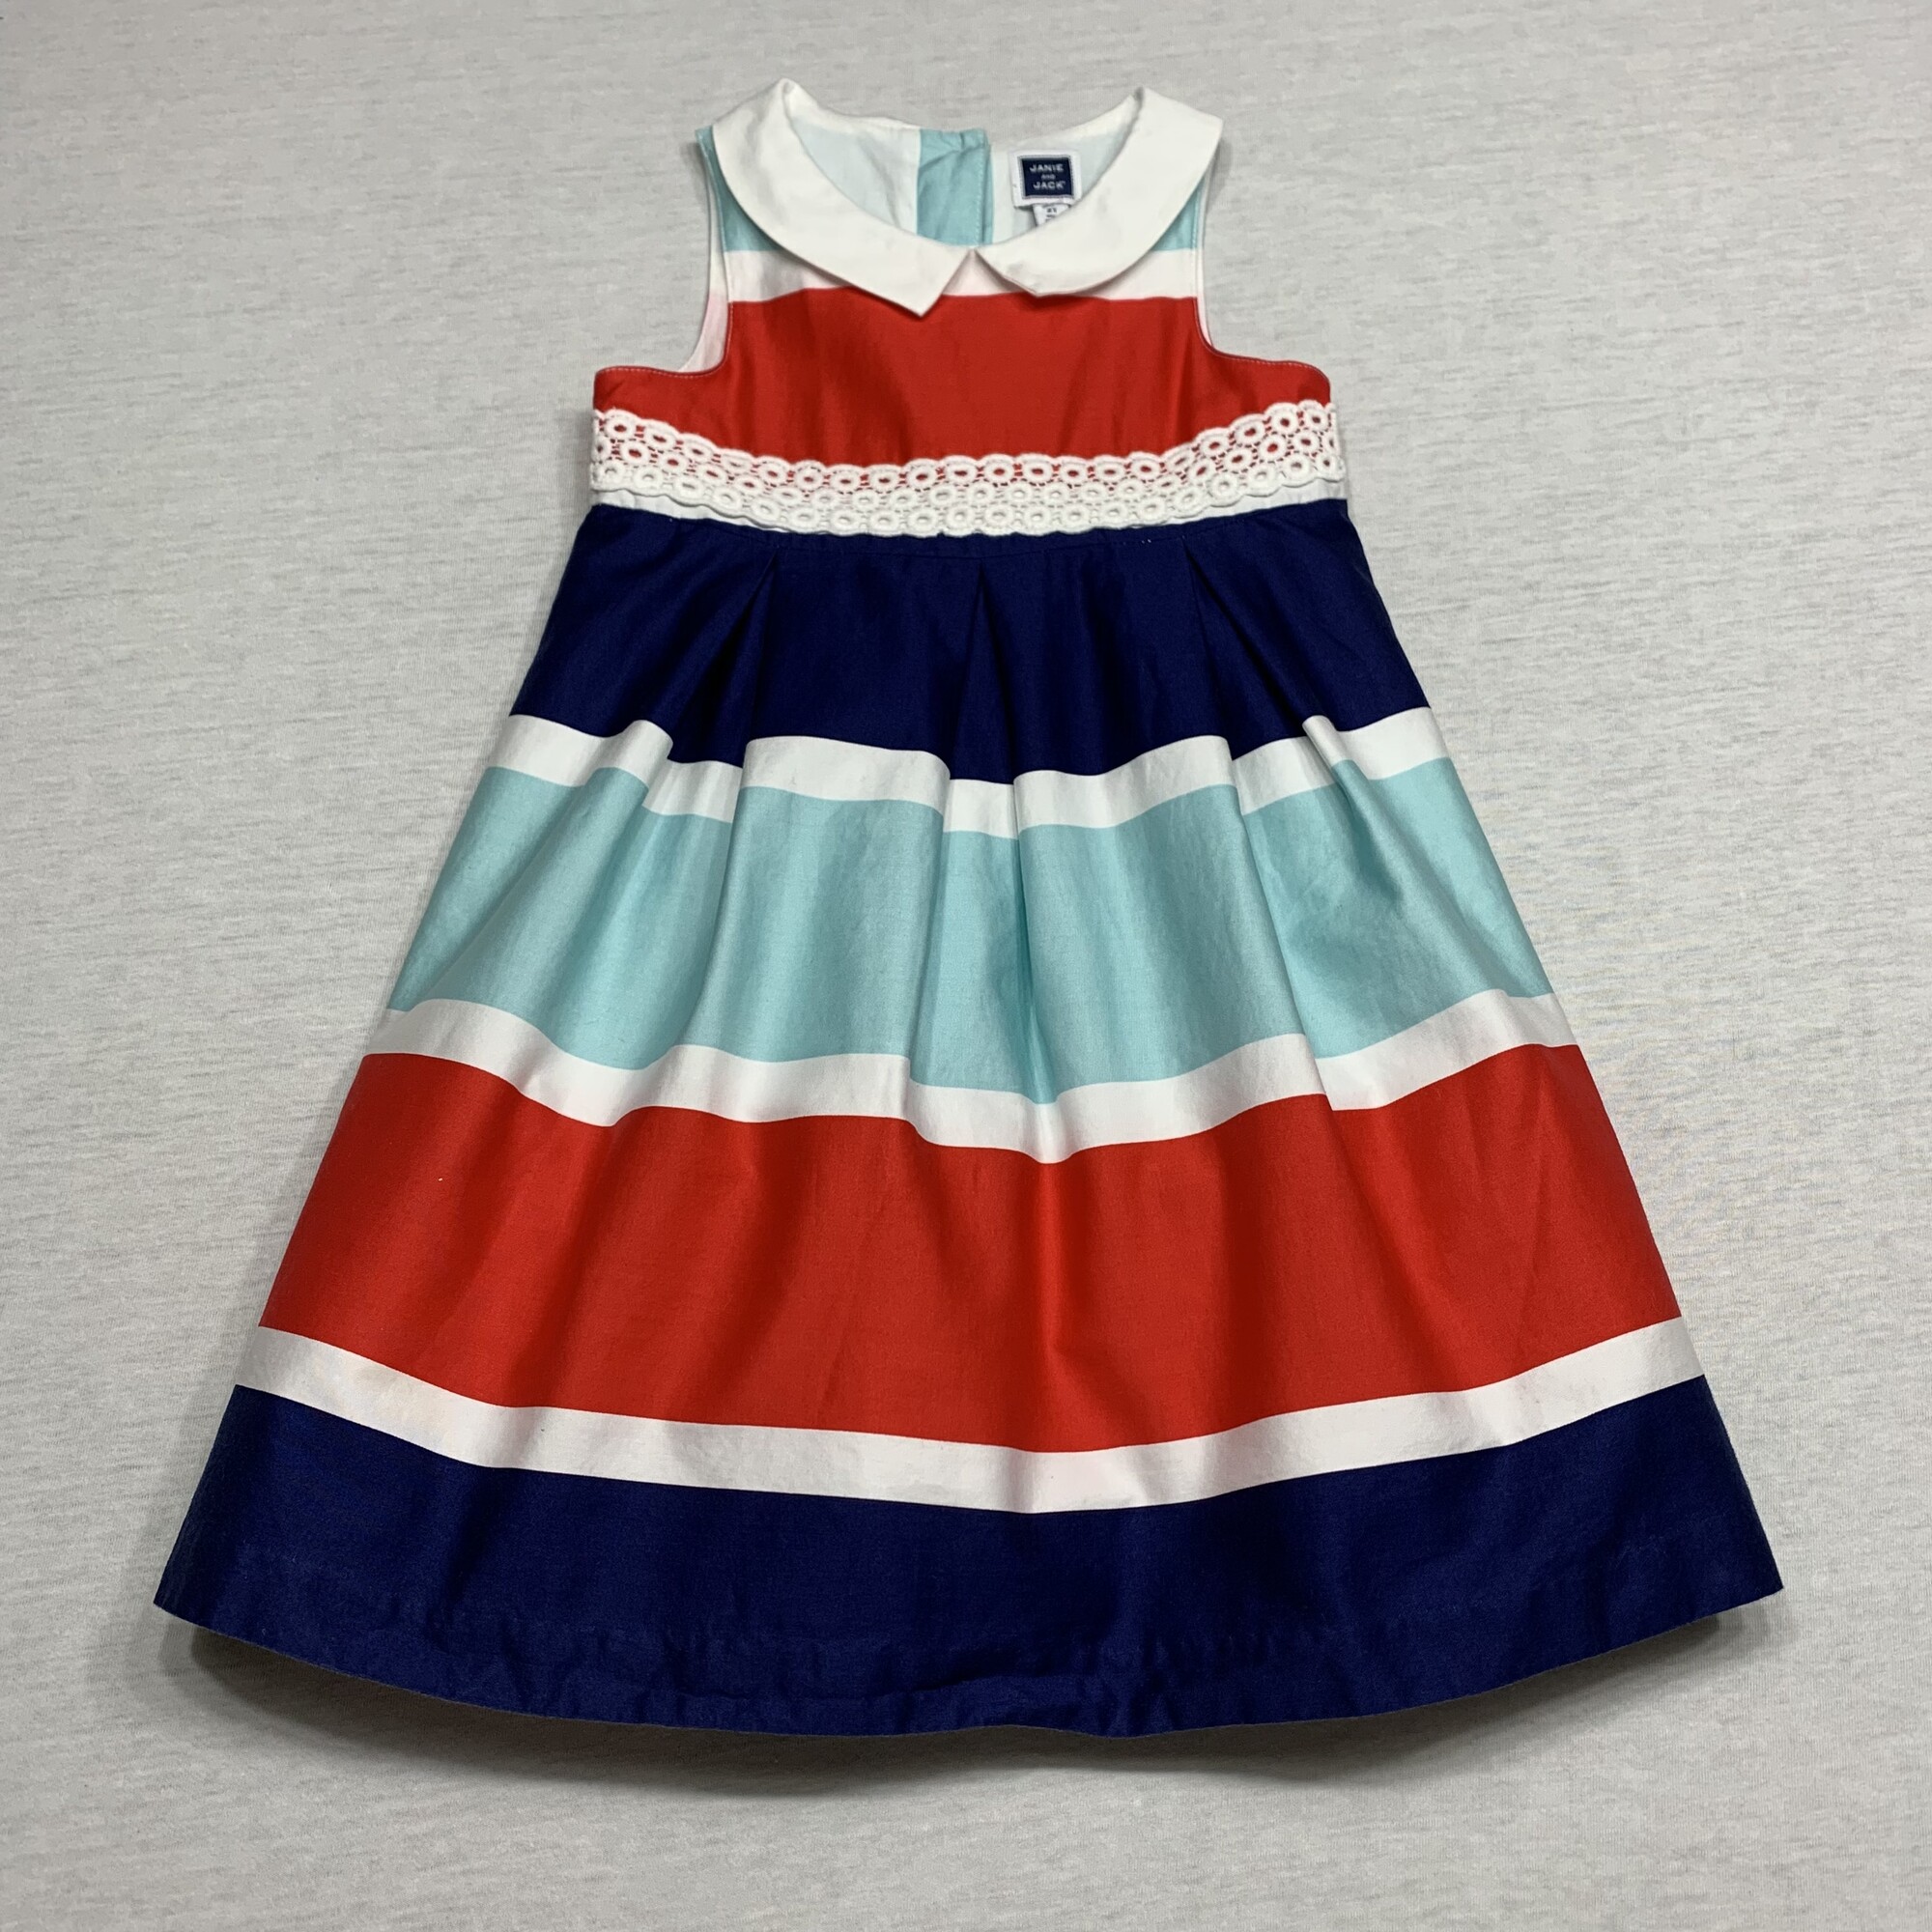 Polished cotton special occasion dress with petticoat lining